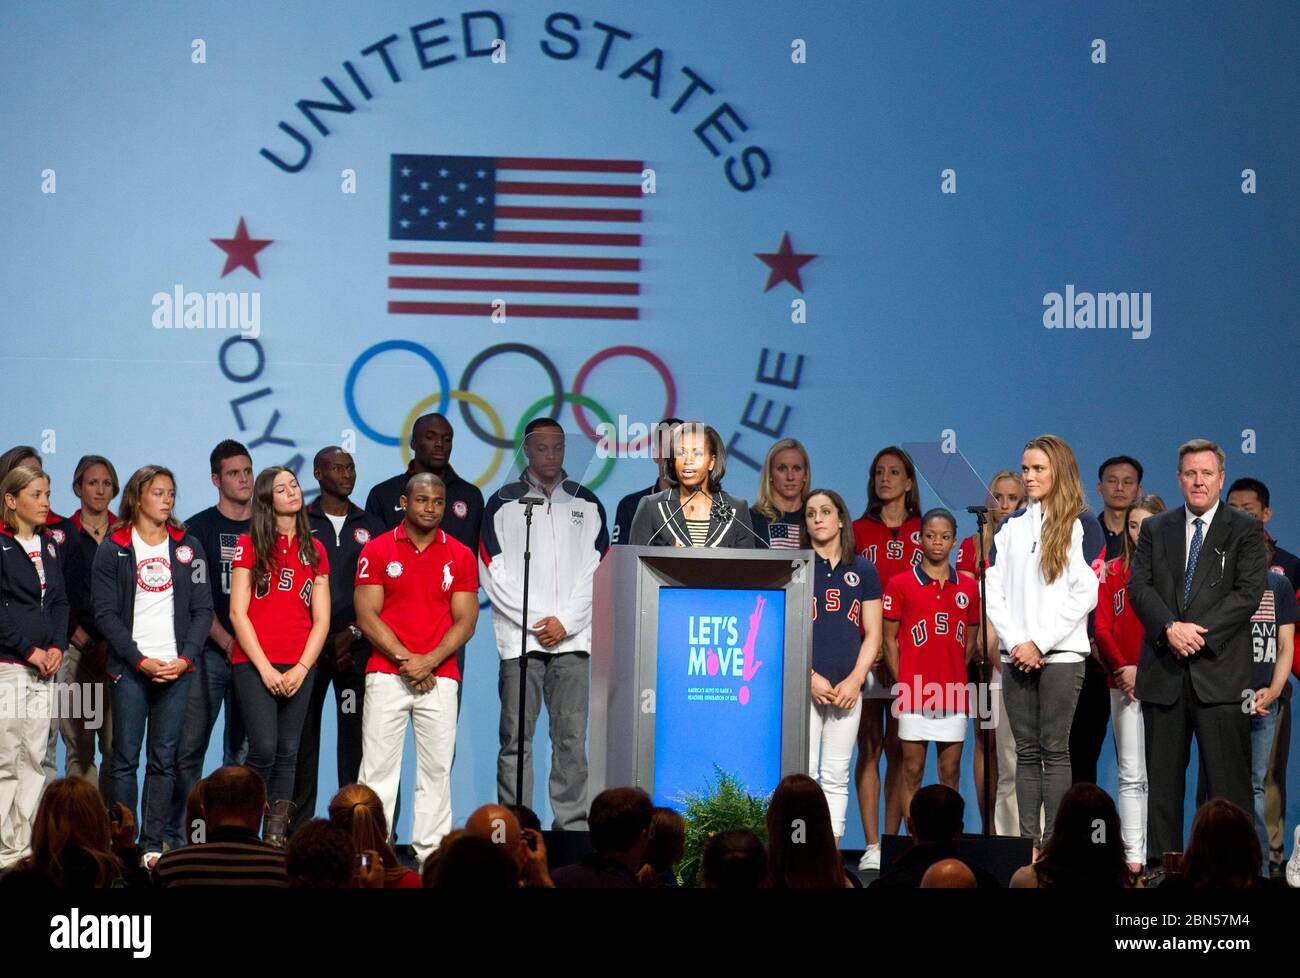 Dallas Texas USA, May 2012: First Lady of the United States Michelle Obama speaks at the United States Olympic Media Summit along with several athletes on stage in Ft. Worth, Texas January 12 , 2012 © Marjorie Kamys Cotera / Daemmrich photos Stock Photo